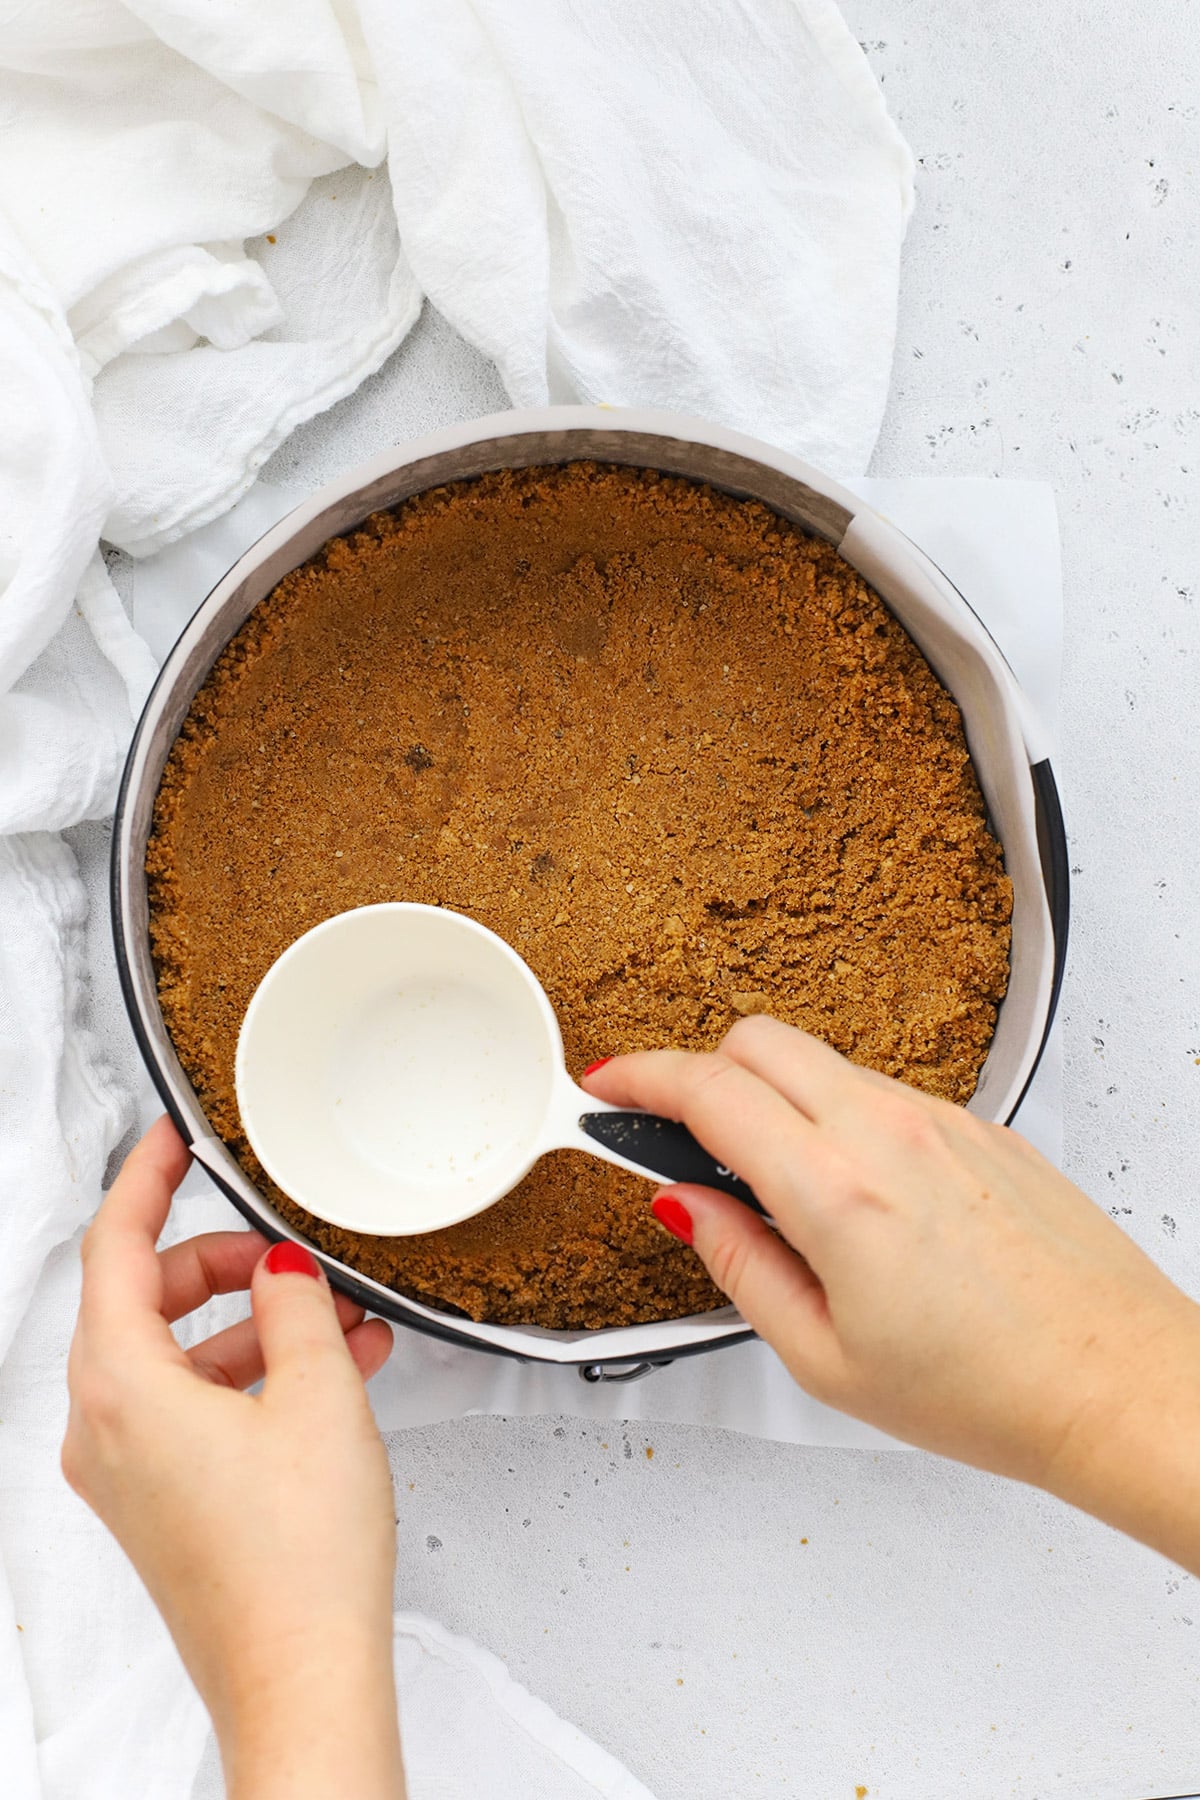 Patting gluten-free graham cracker crust into a parchment lined springform pan